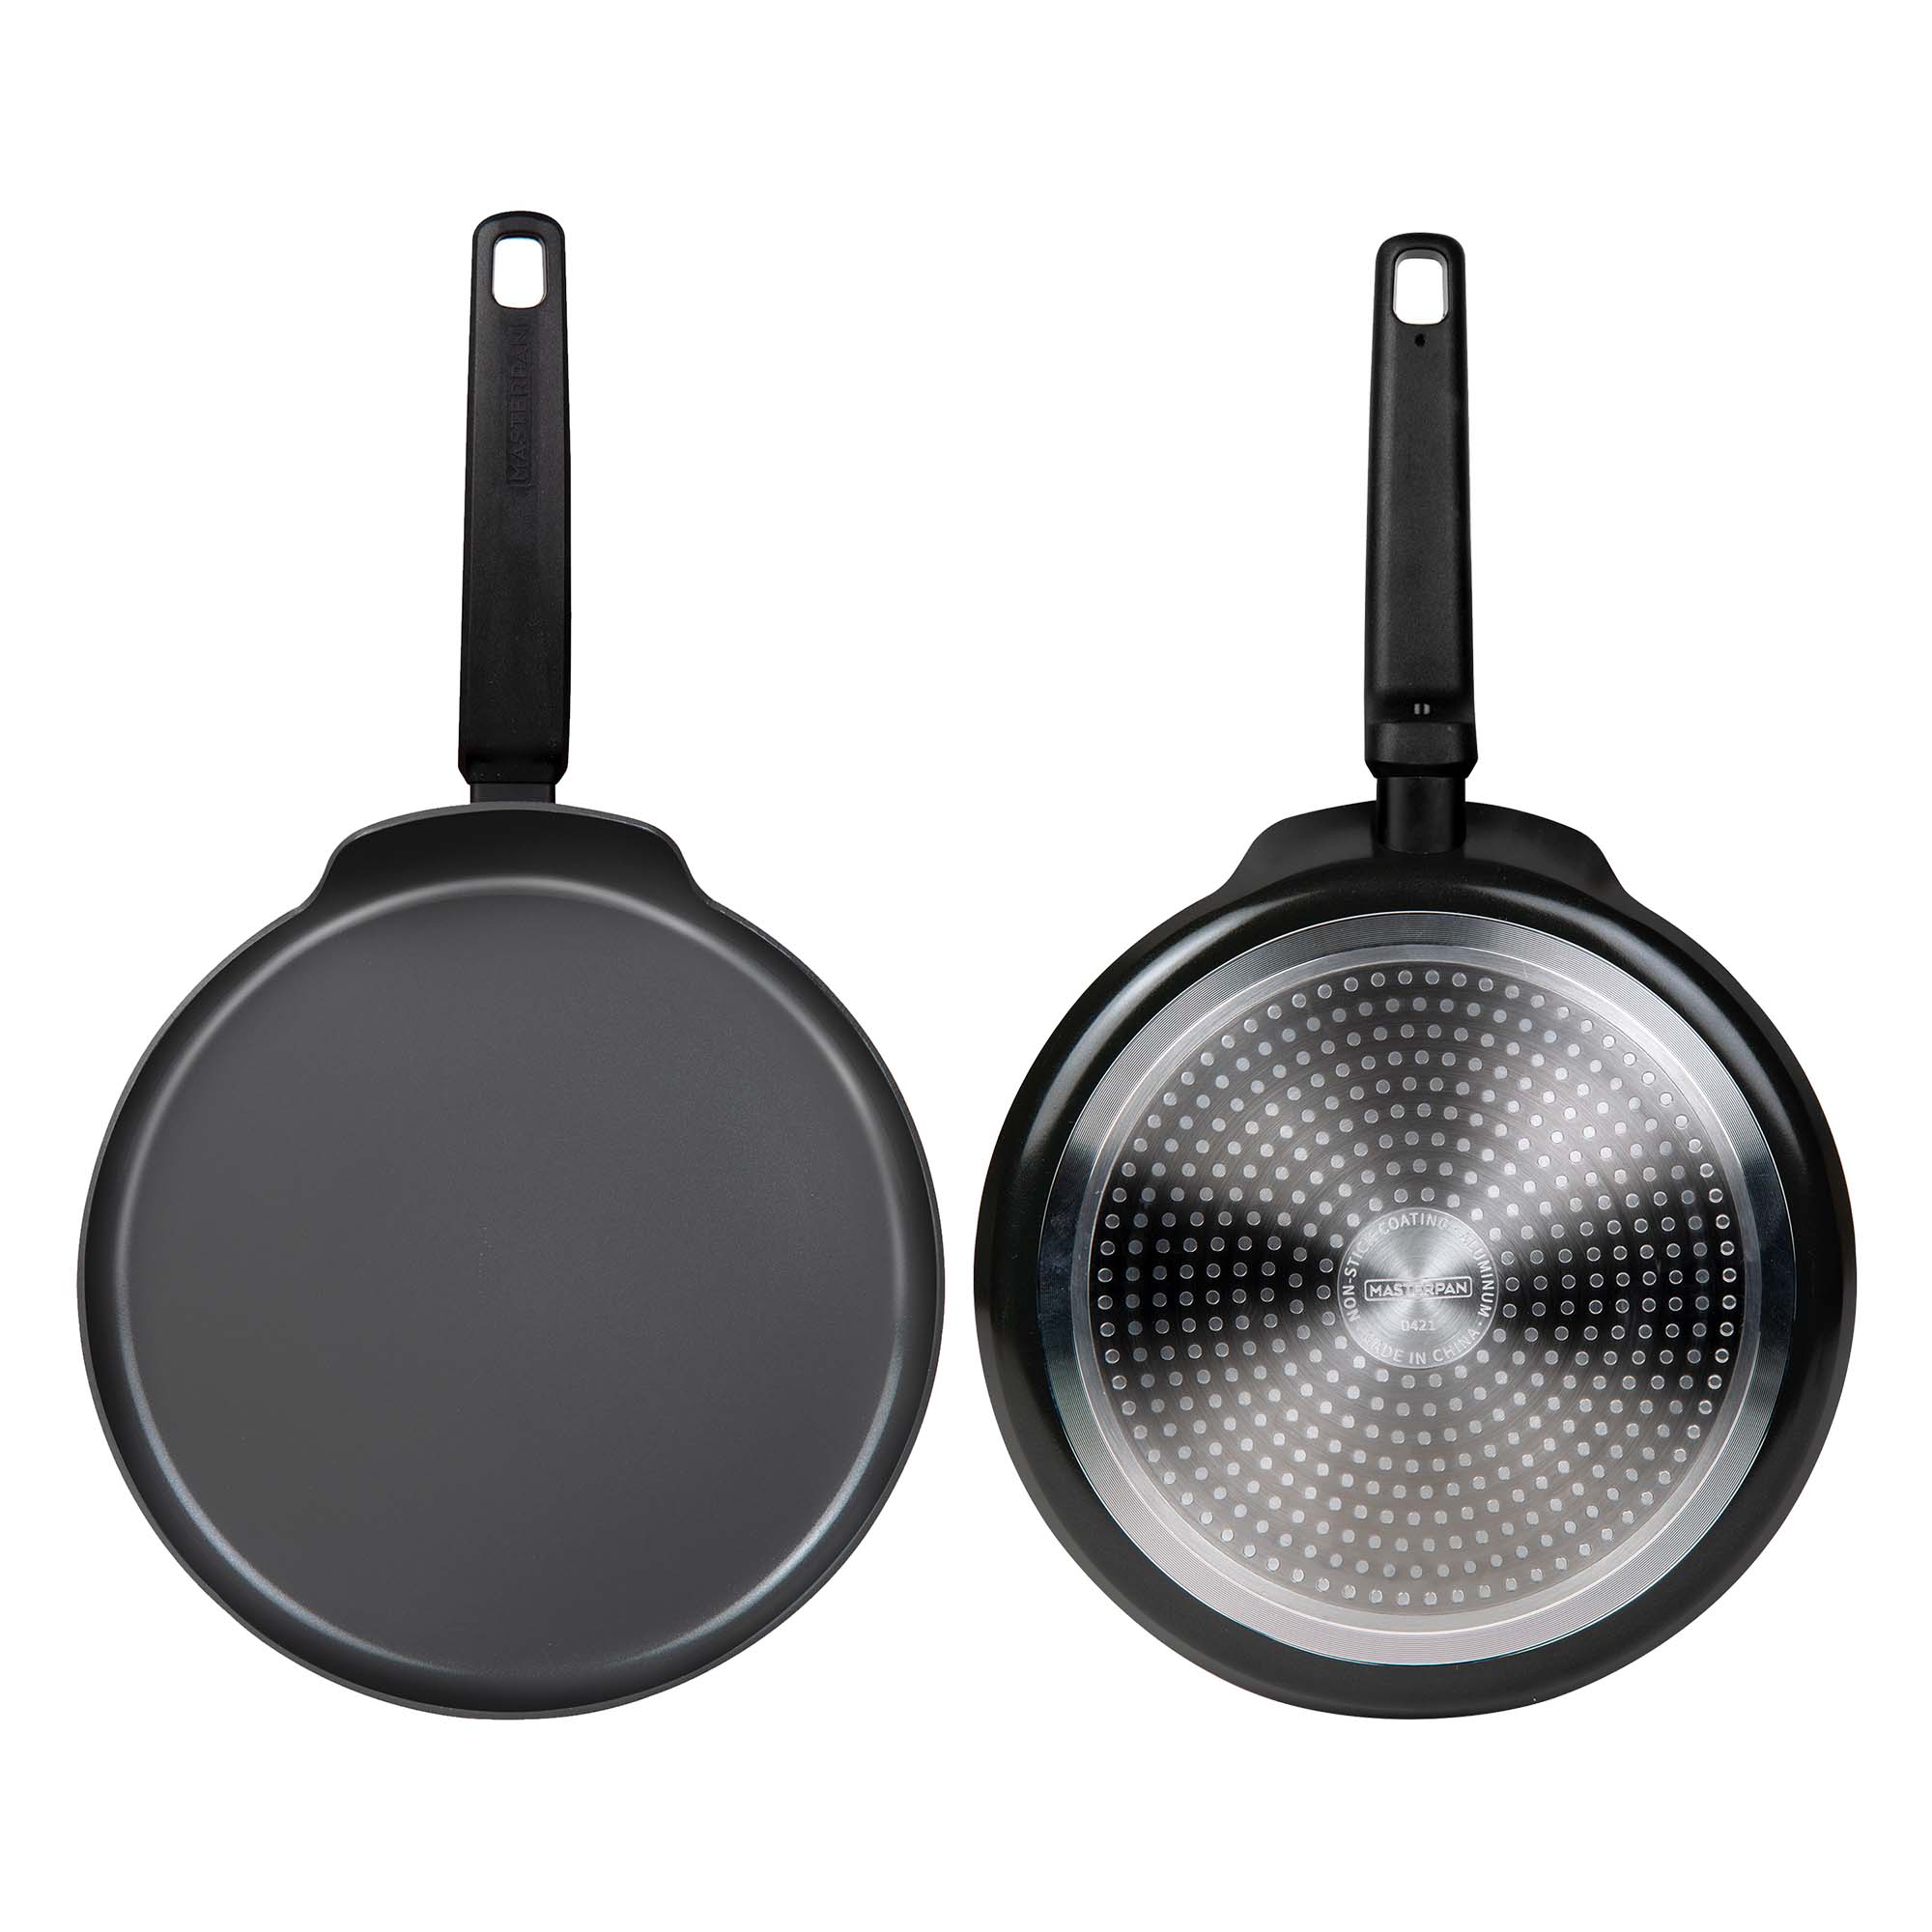 Zyliss Cookware 8 Nonstick Fry Pan - Oven, Dishwasher, Induction and Metal